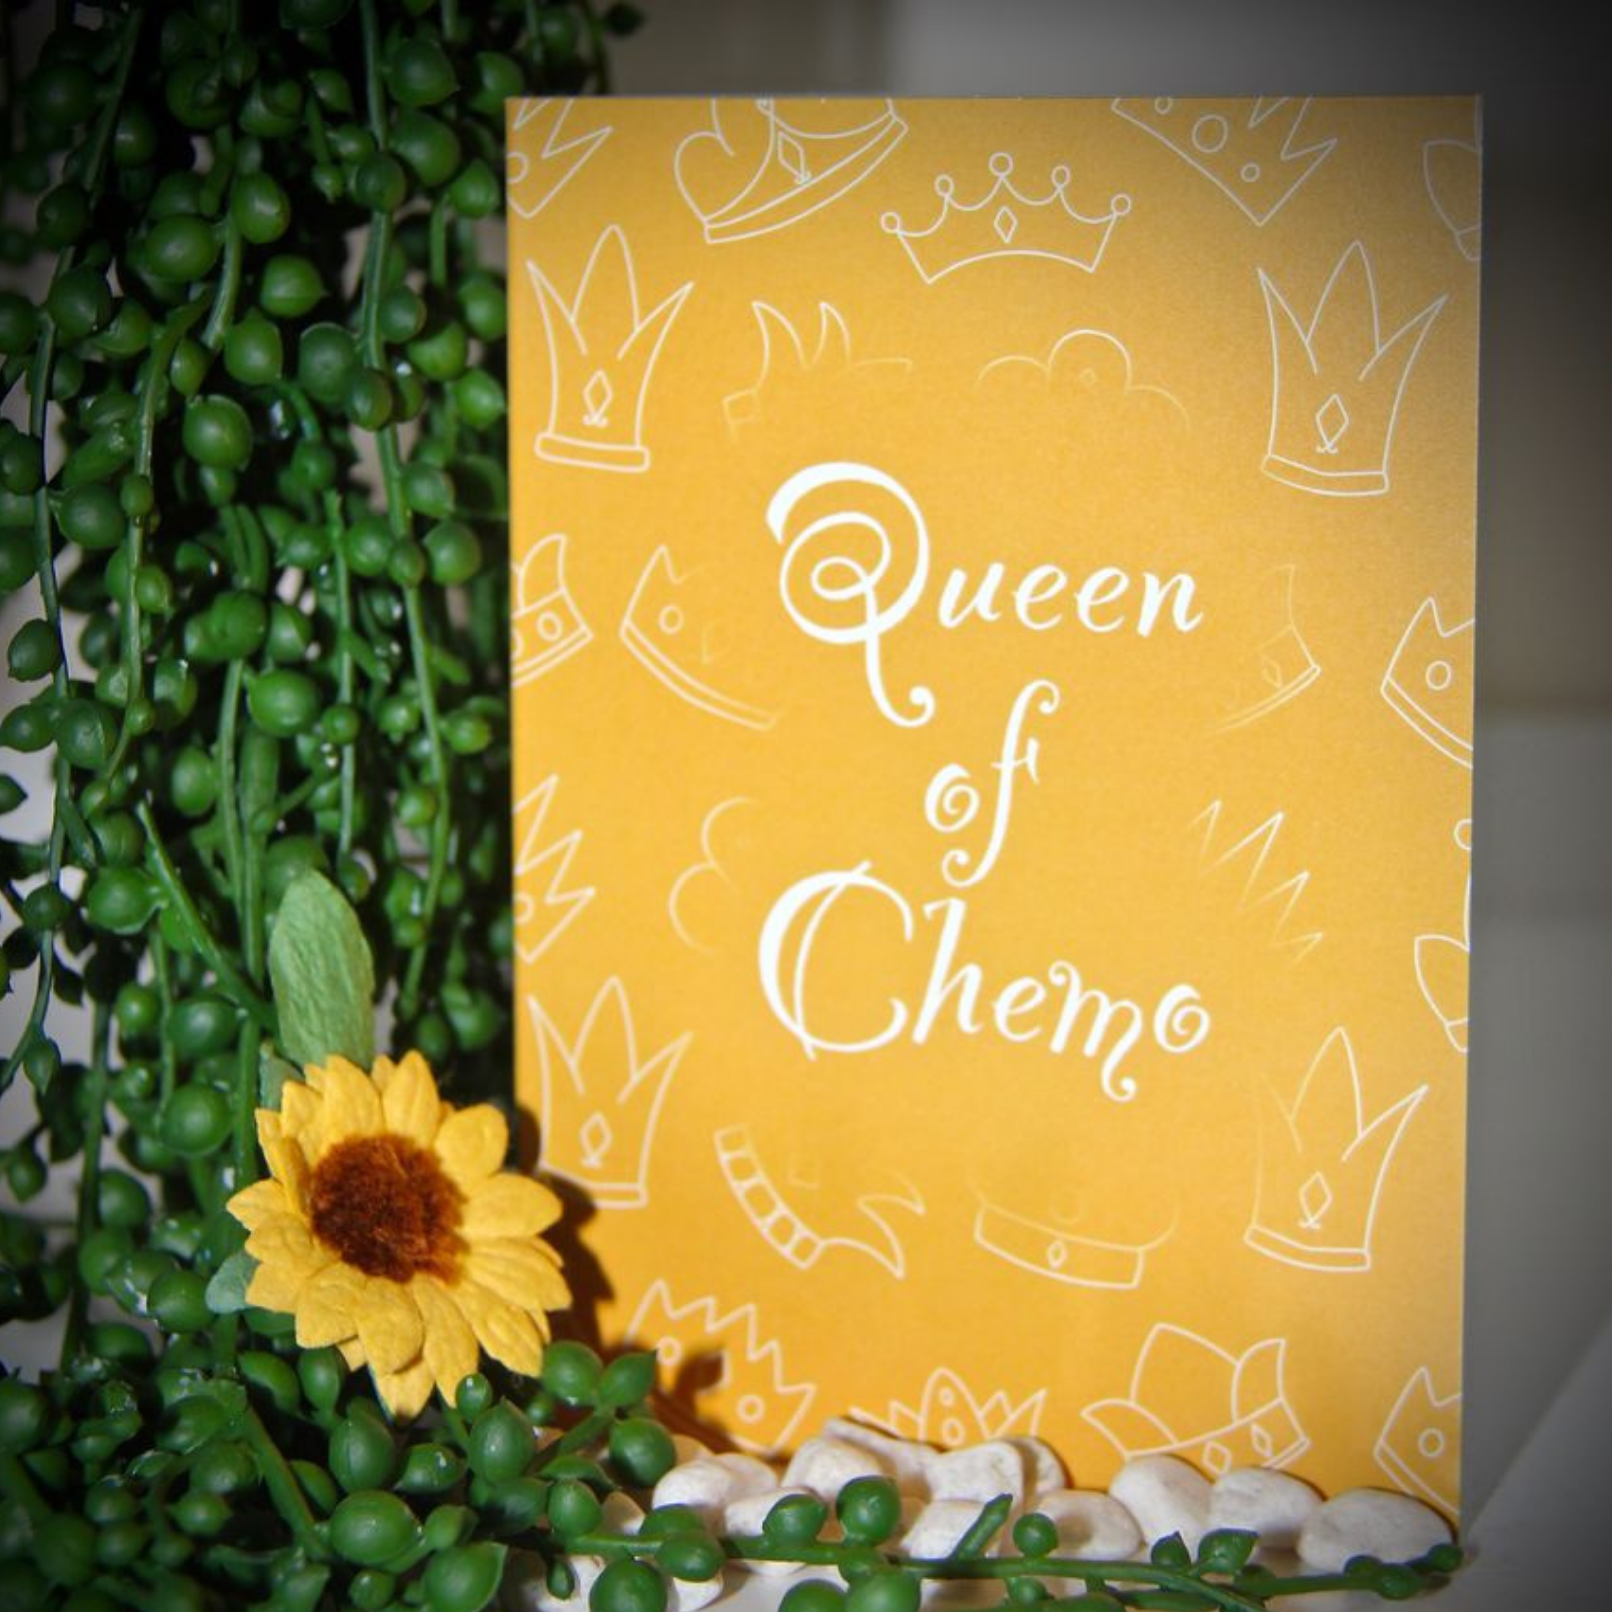 Queen of Chemo card